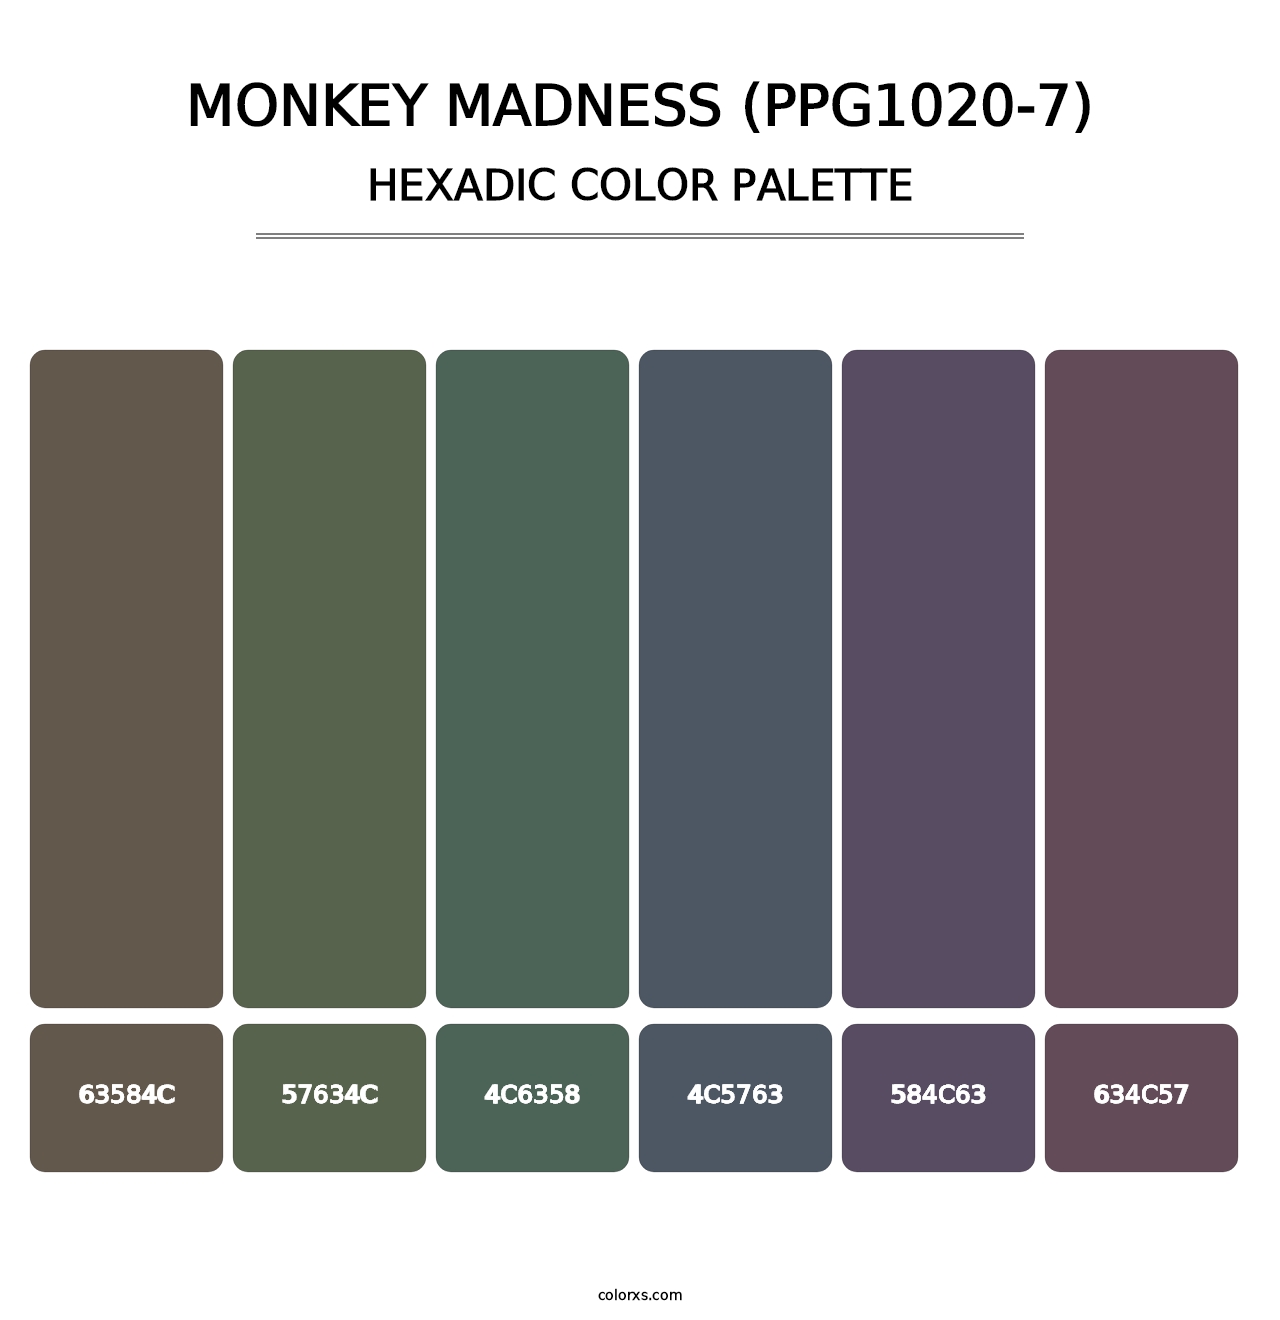 Monkey Madness (PPG1020-7) - Hexadic Color Palette